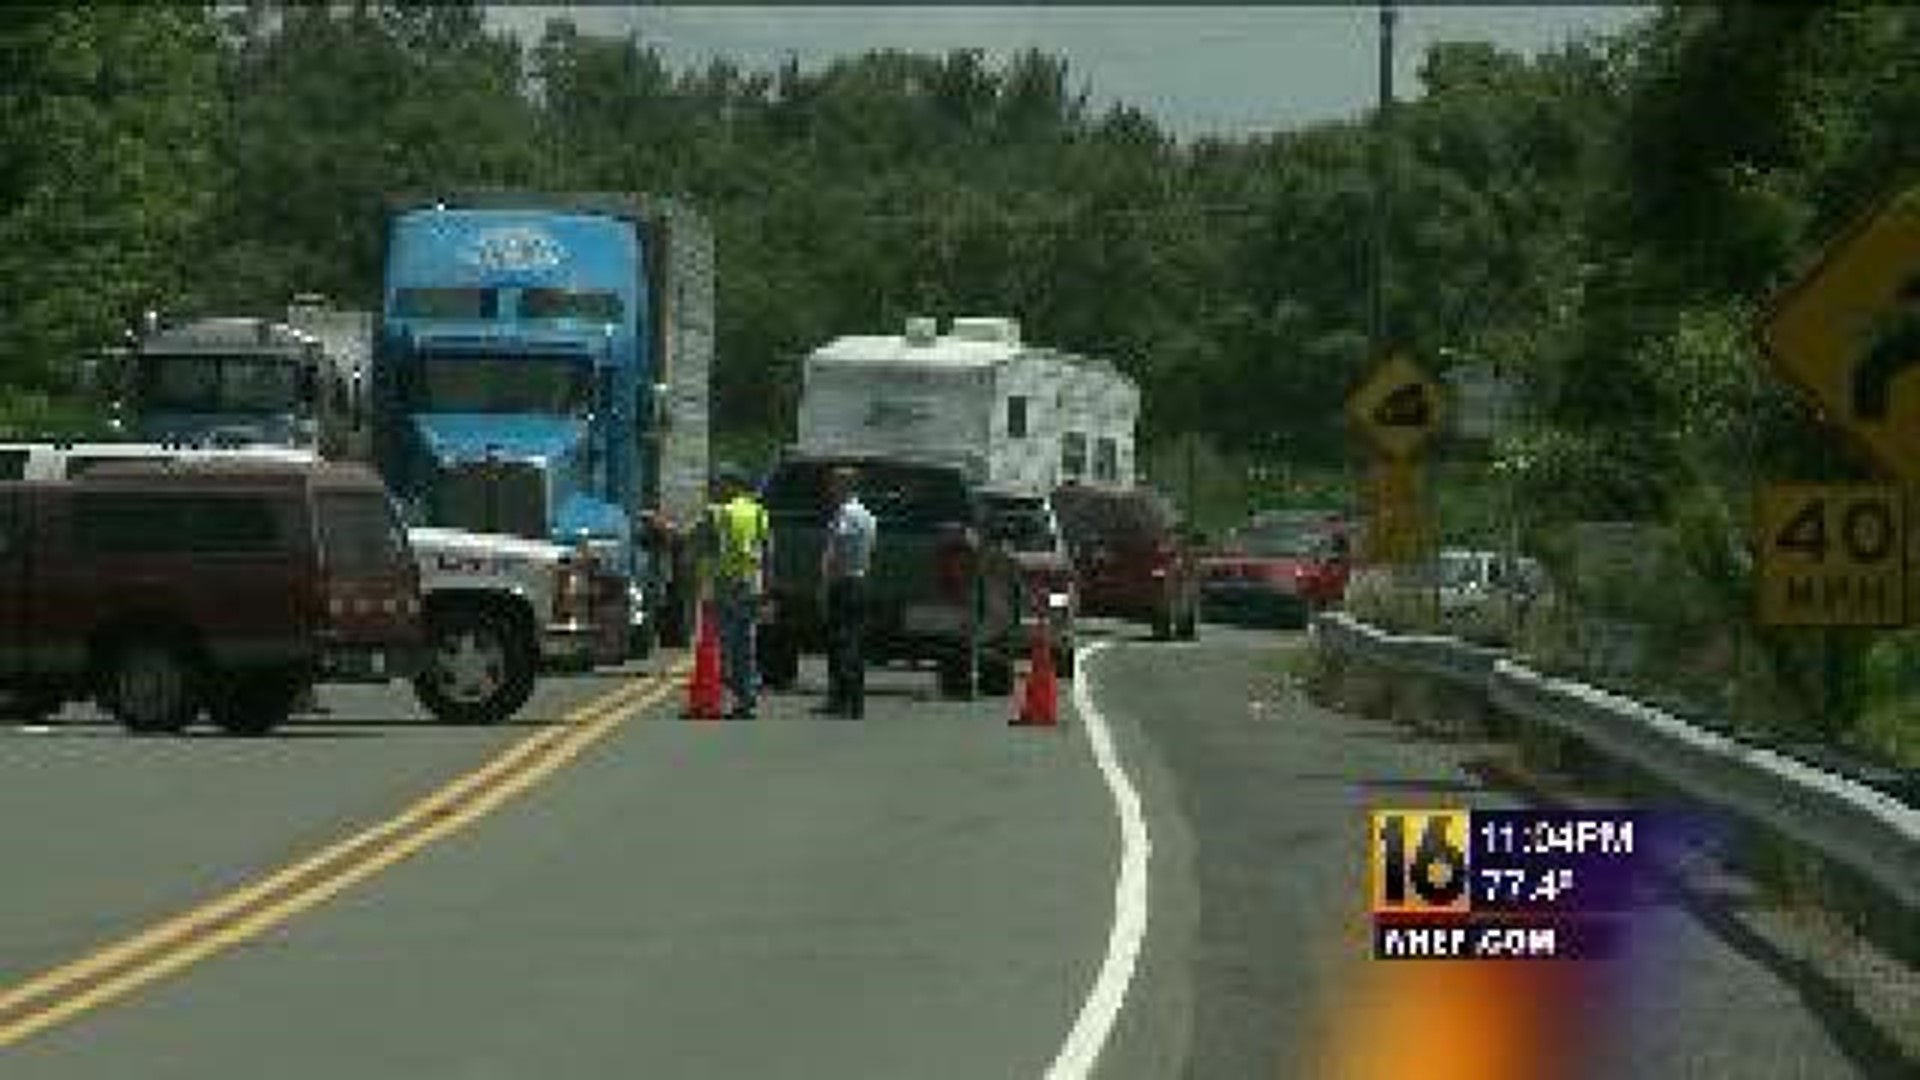 UPDATE: Route 54 Re-opened After Deadly Crash